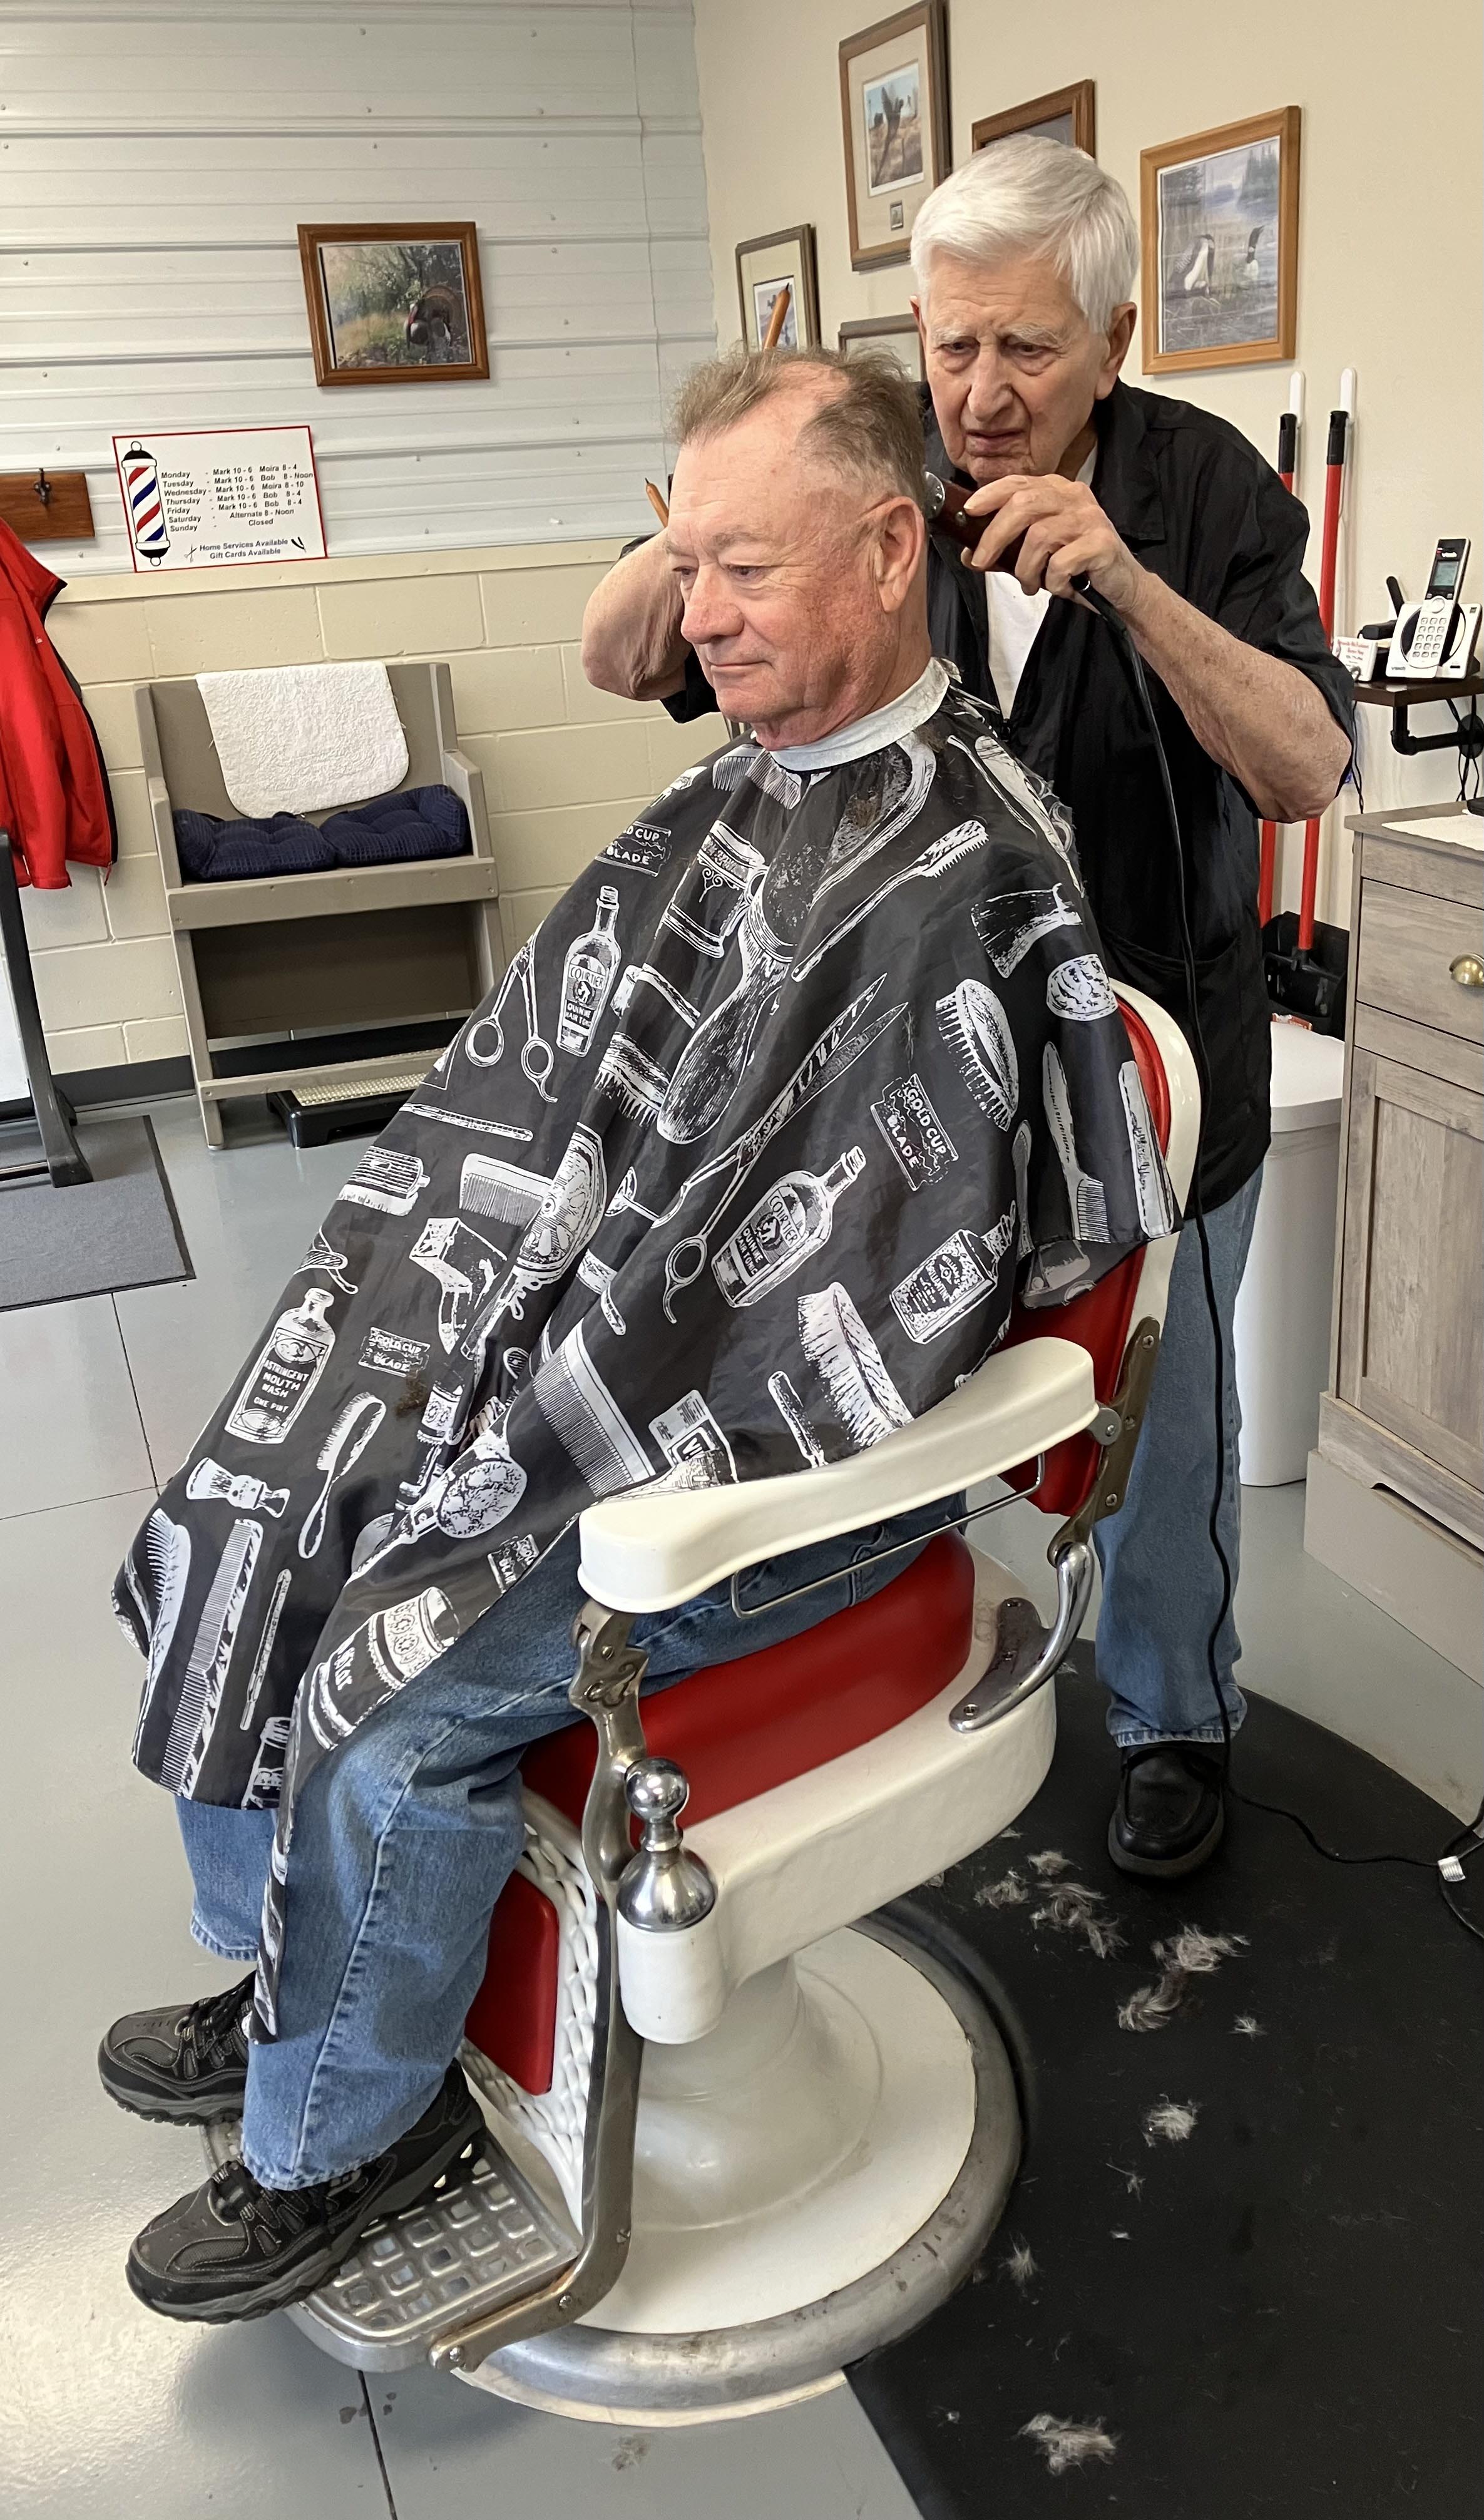 91-year-old just opened a barber shop in Wisconsin: 'I'm too happy